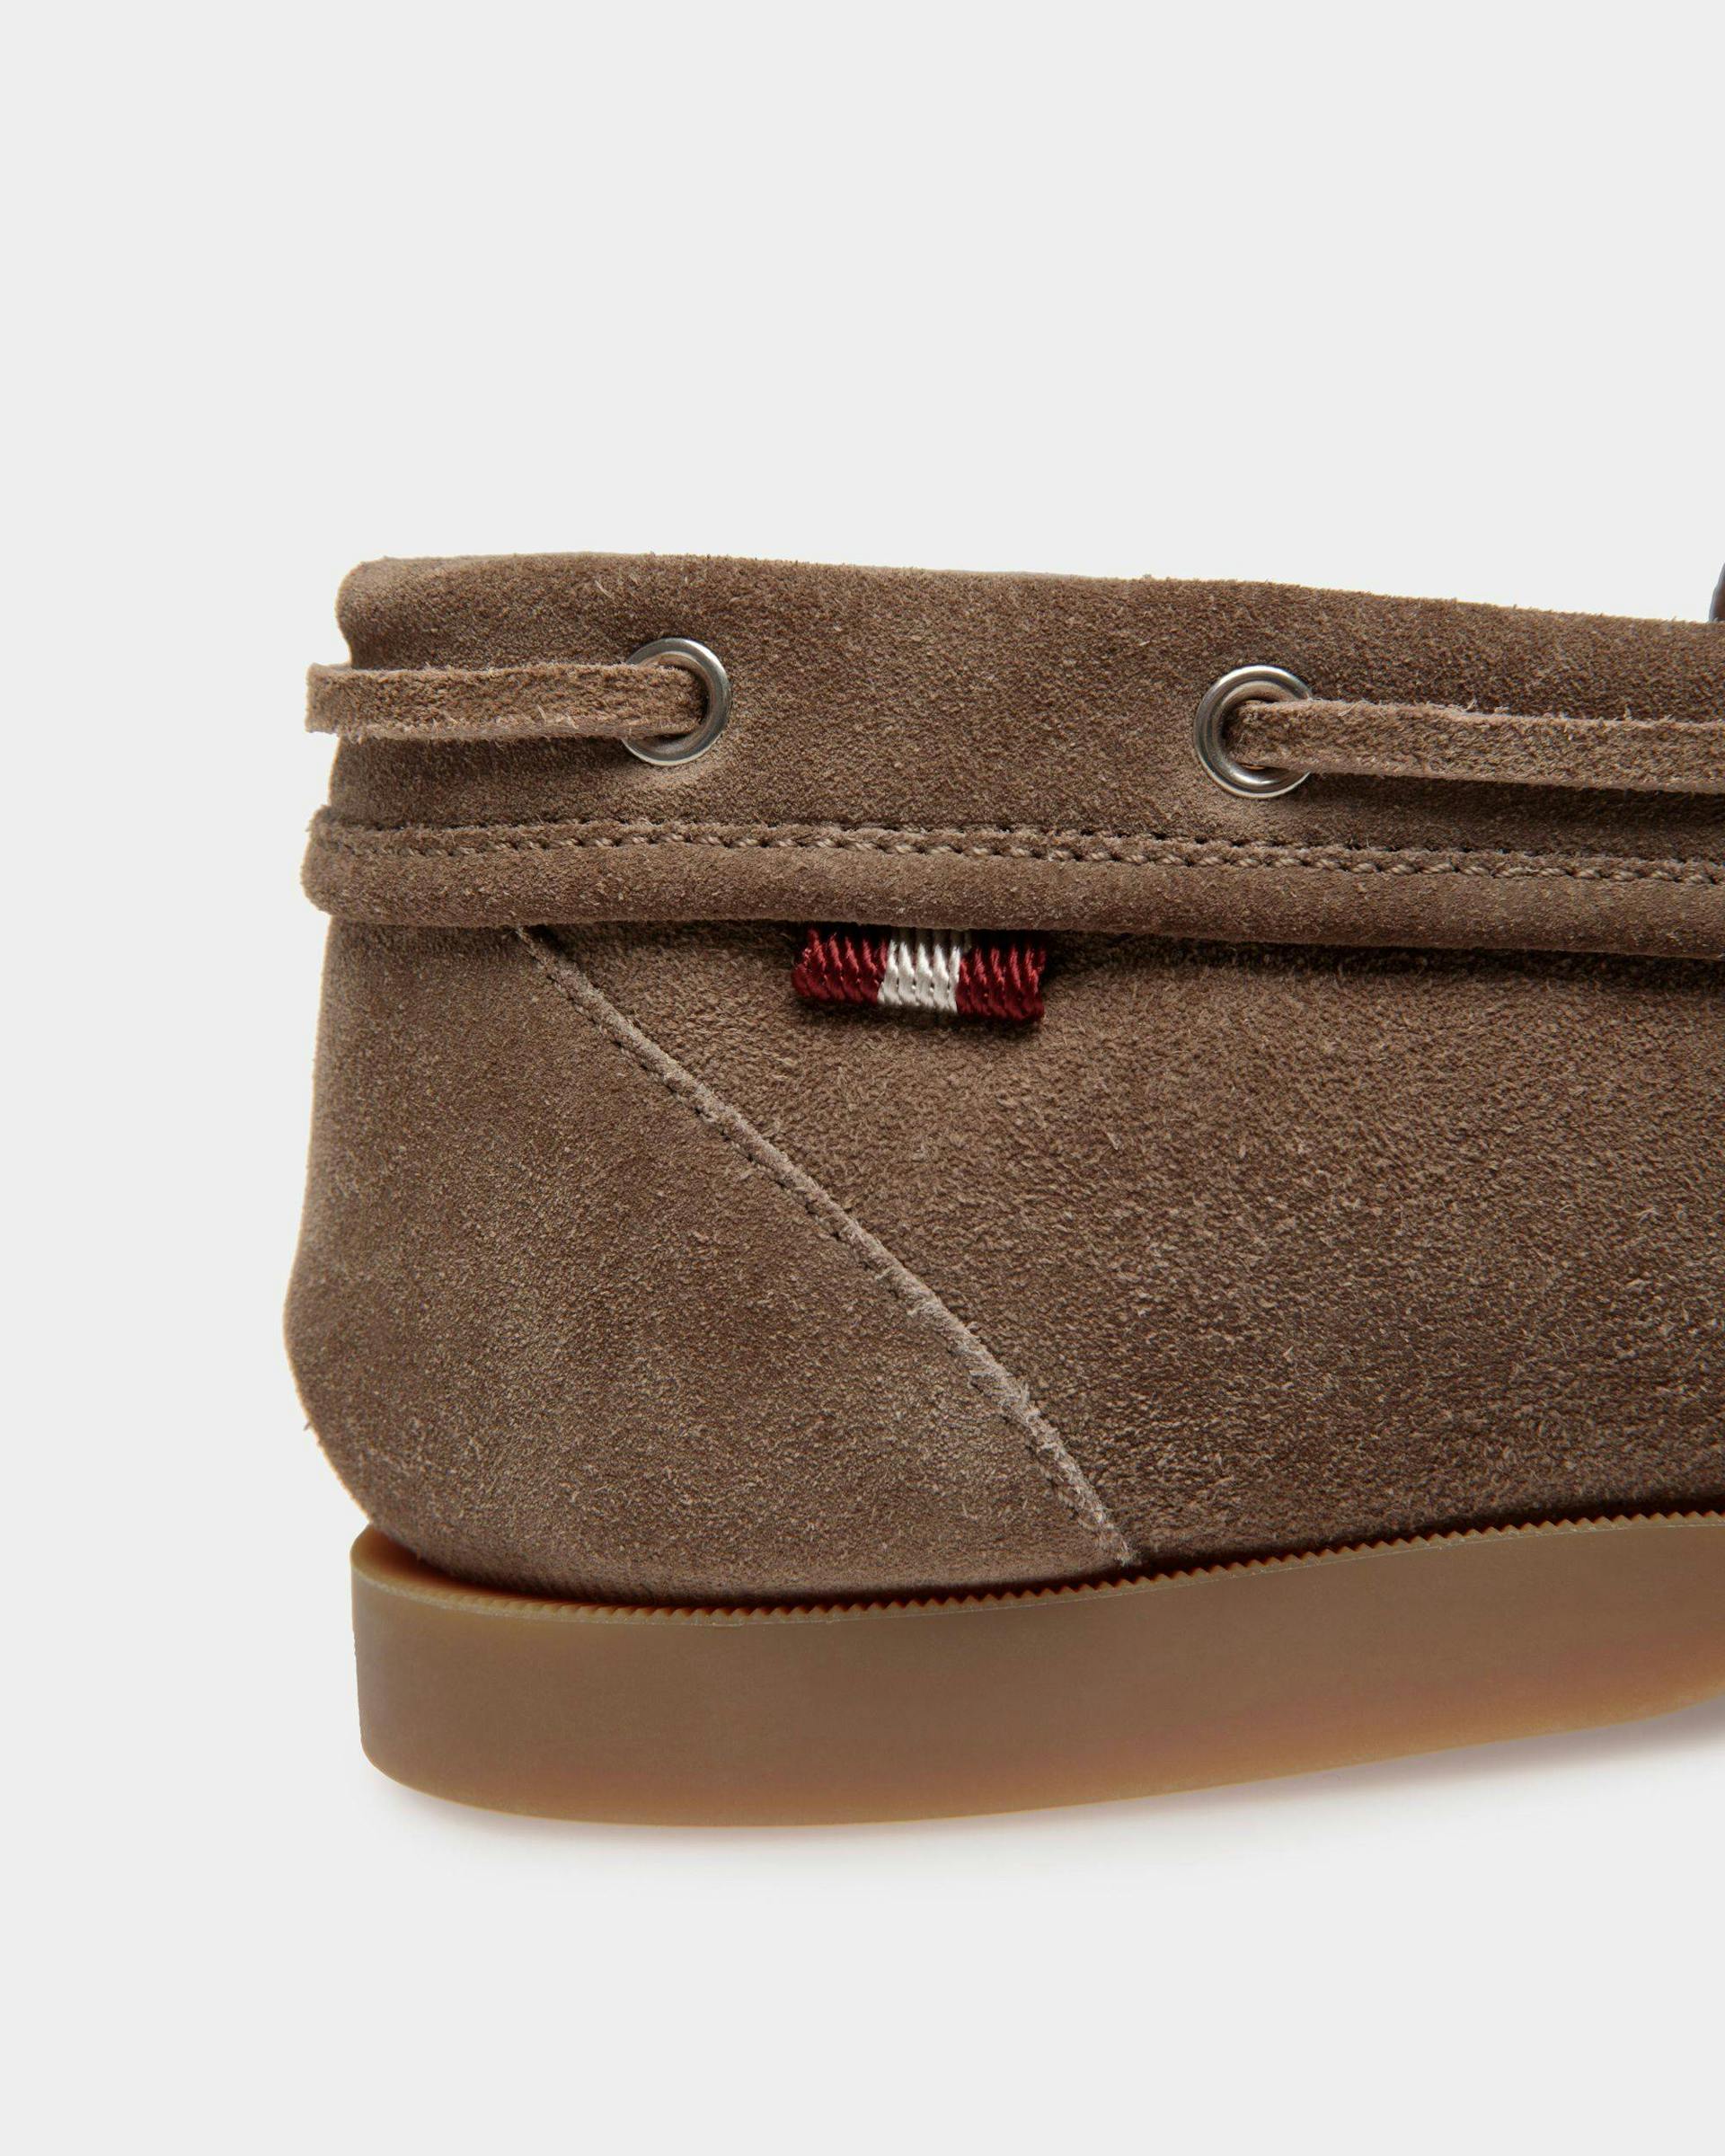 Men's Nelson Loafer in Beige Suede Leather | Bally | Still Life Detail